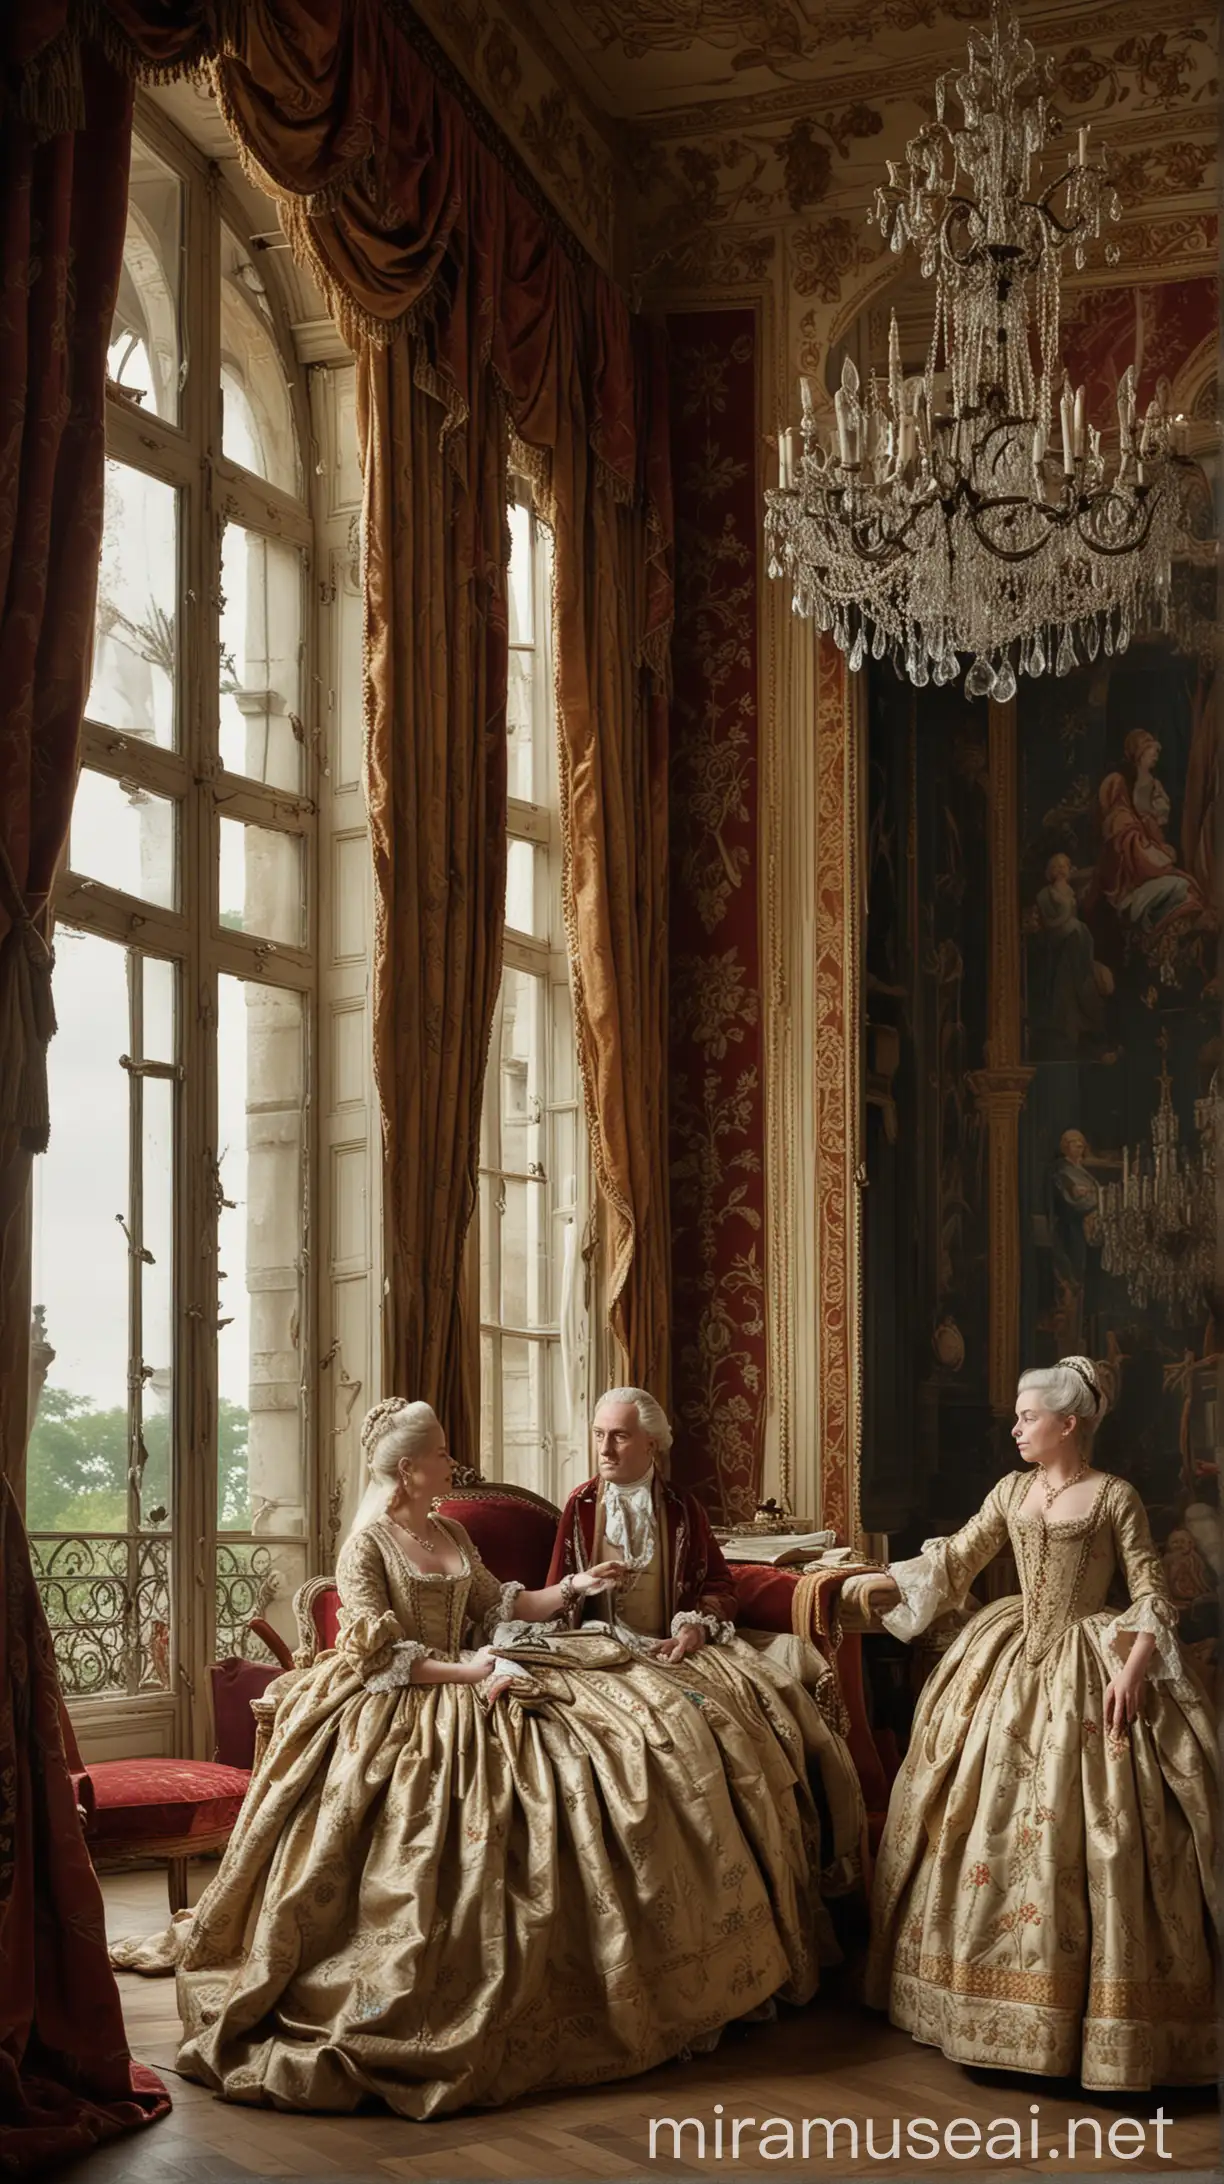 King Louis XVI Consults Royal Physician in Ornate French Palace